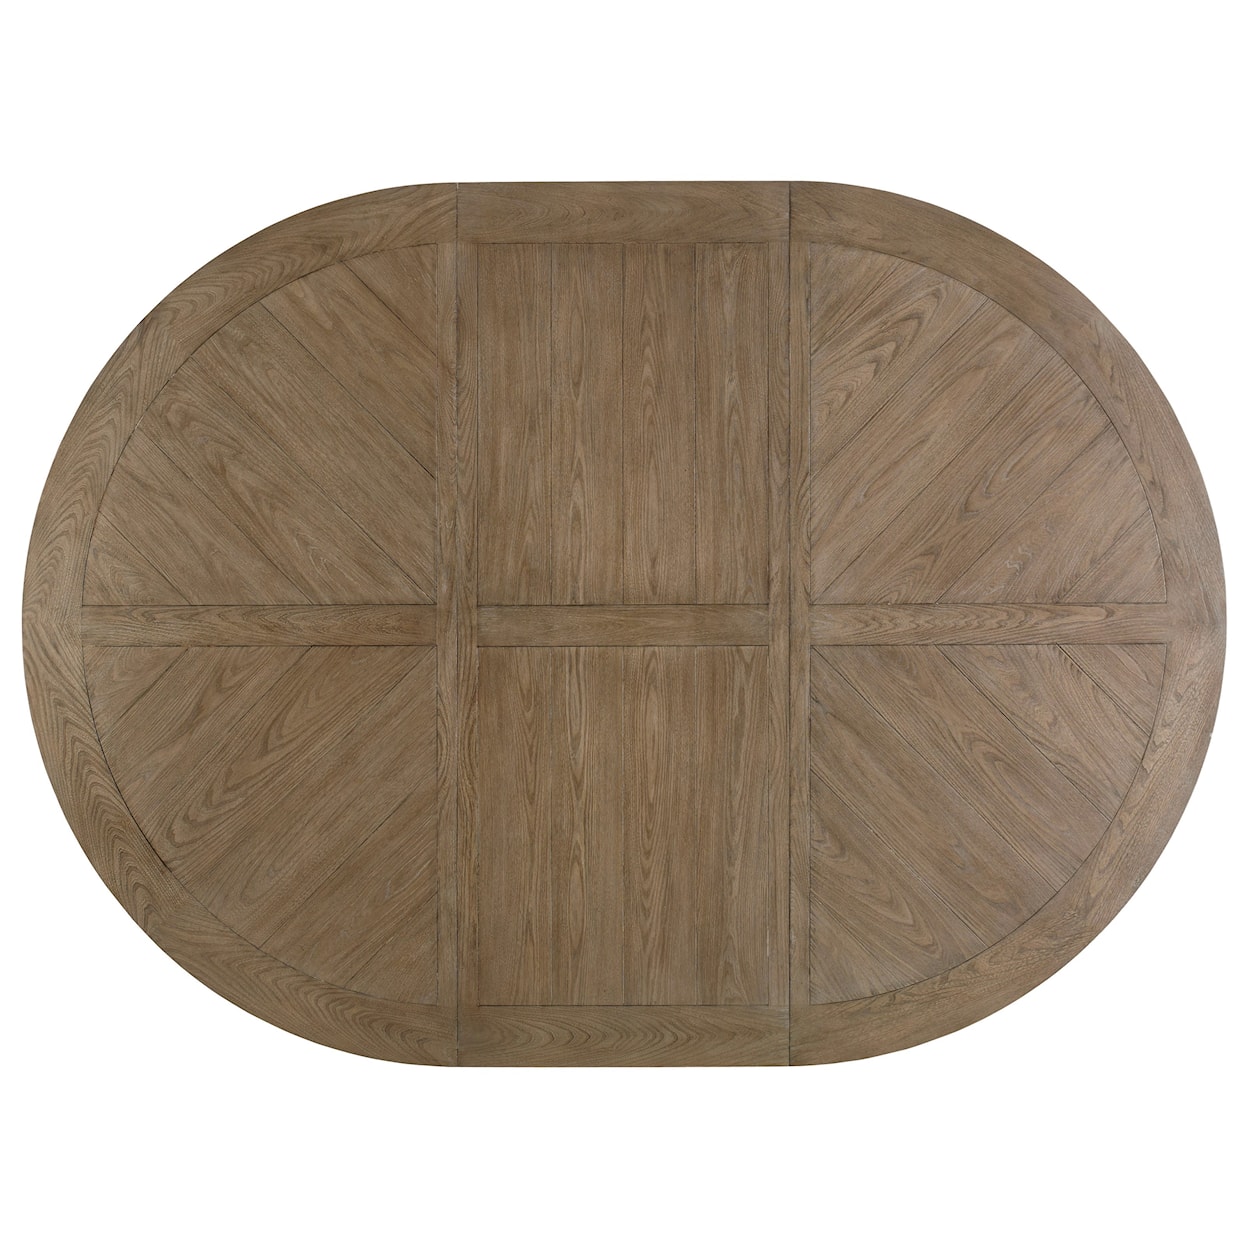 Tommy Bahama Home Cypress Point Atwell Round Dining Table